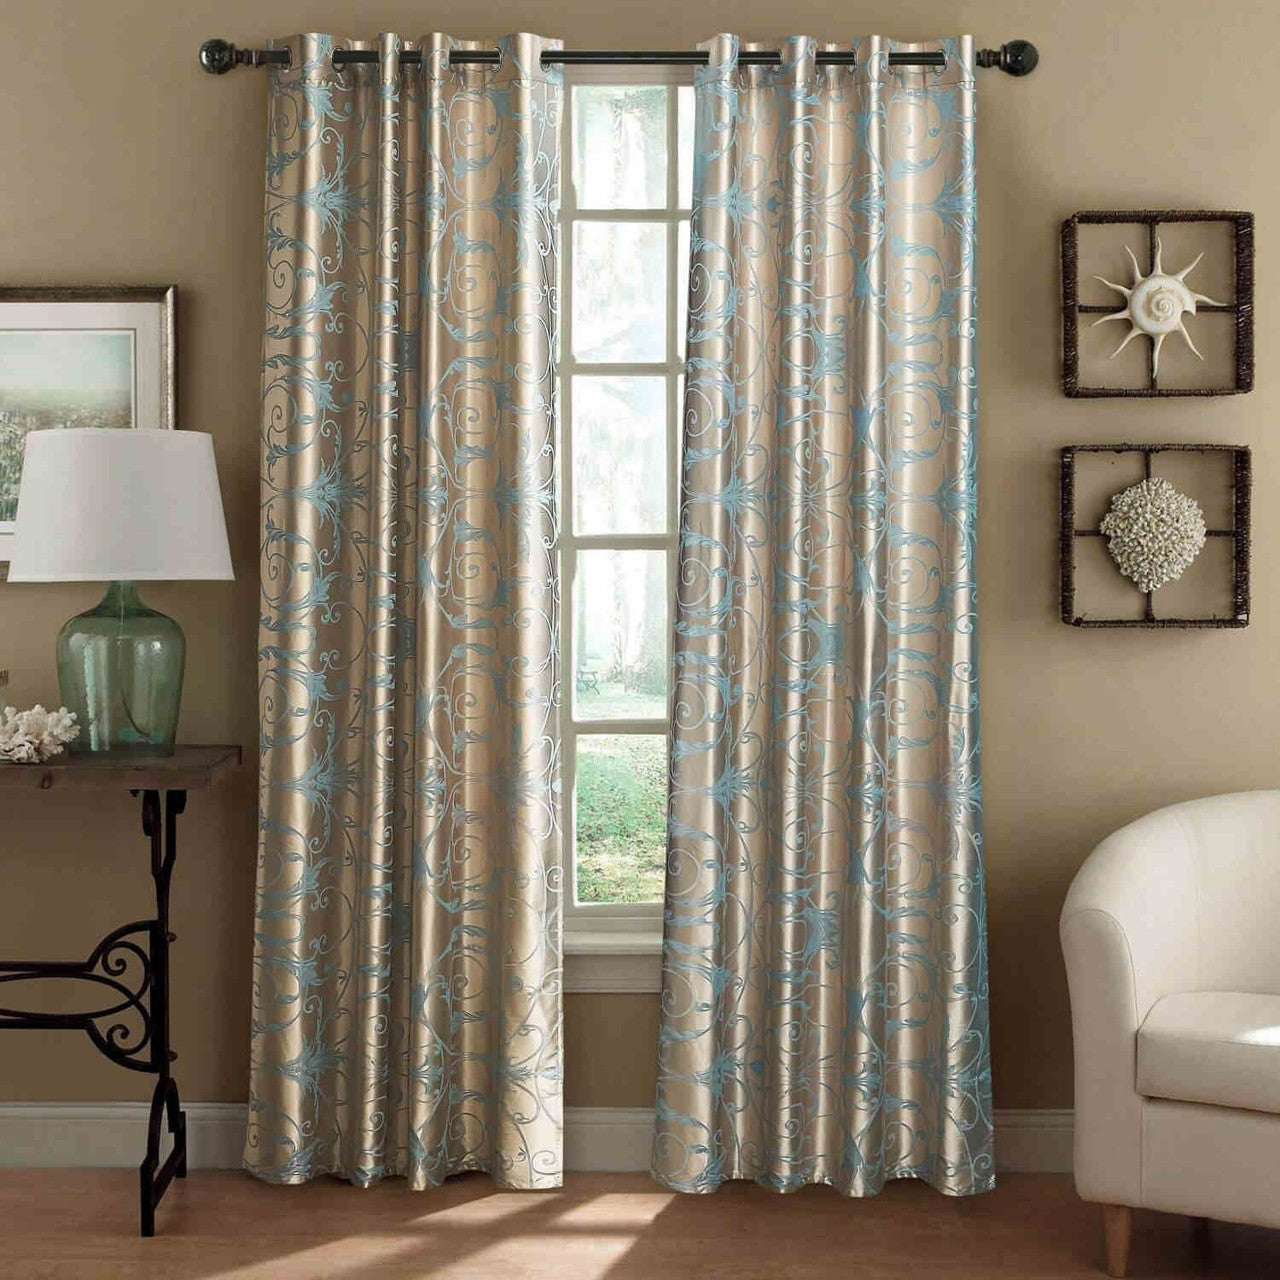 St. Petersburg - Luxurious Jacquard Curtains by Dolce-Mela